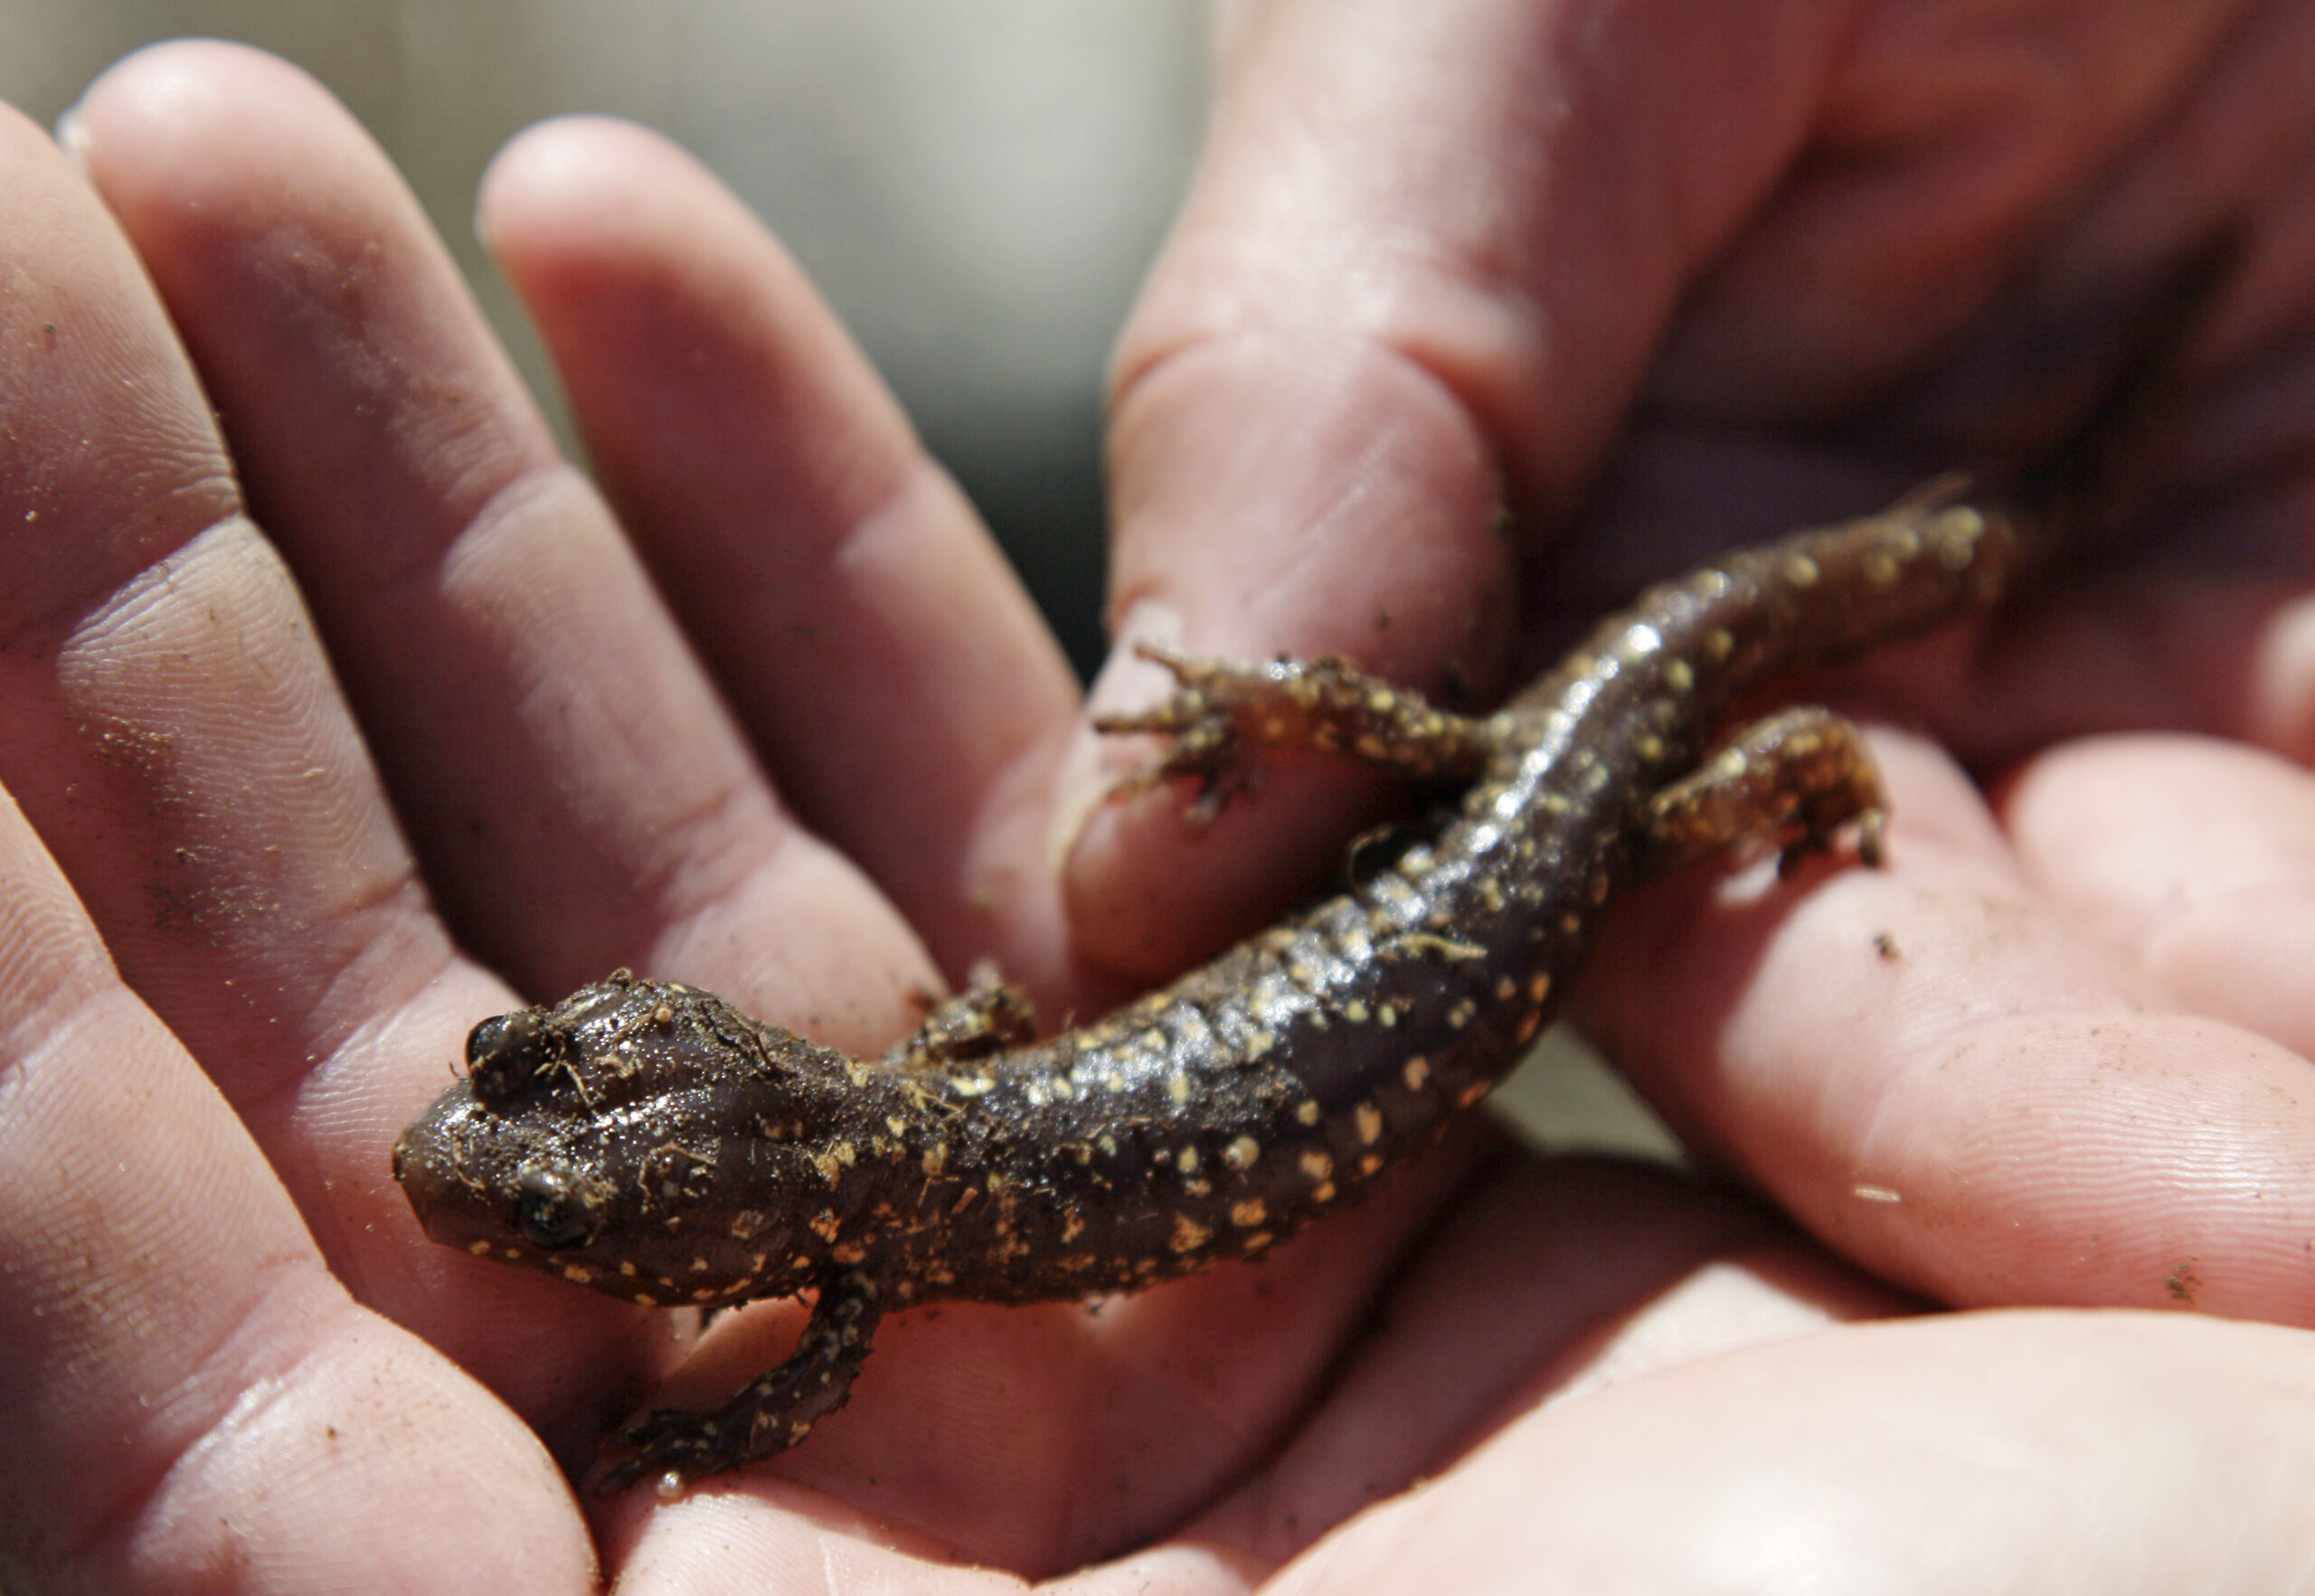 Researchers Hope More Salamanders Avoided Becoming Roadkill With Fewer People Out Driving